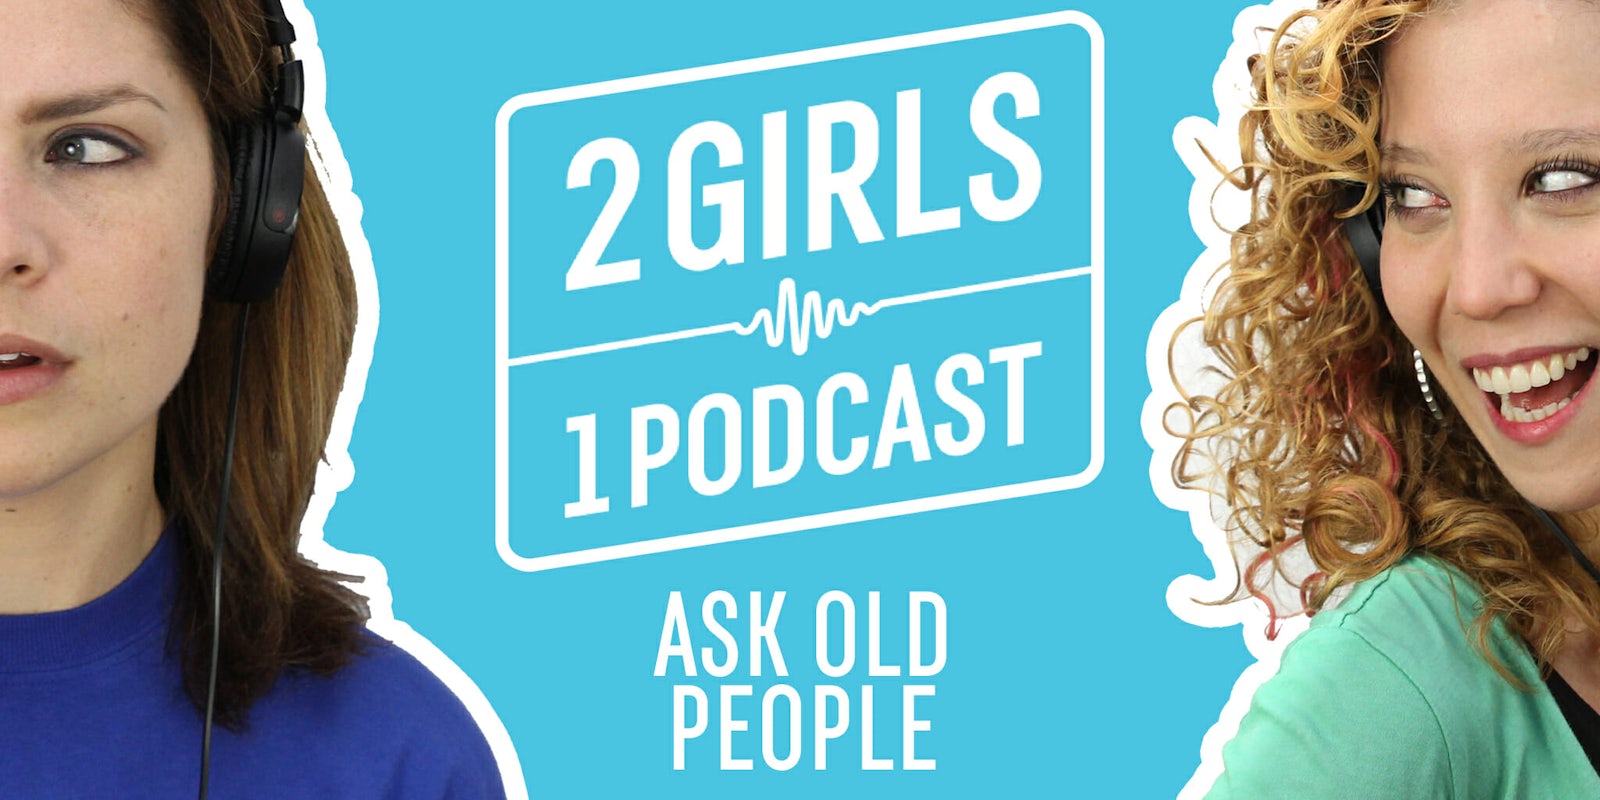 2 Girls 1 Podcast ASK OLD PEOPLE